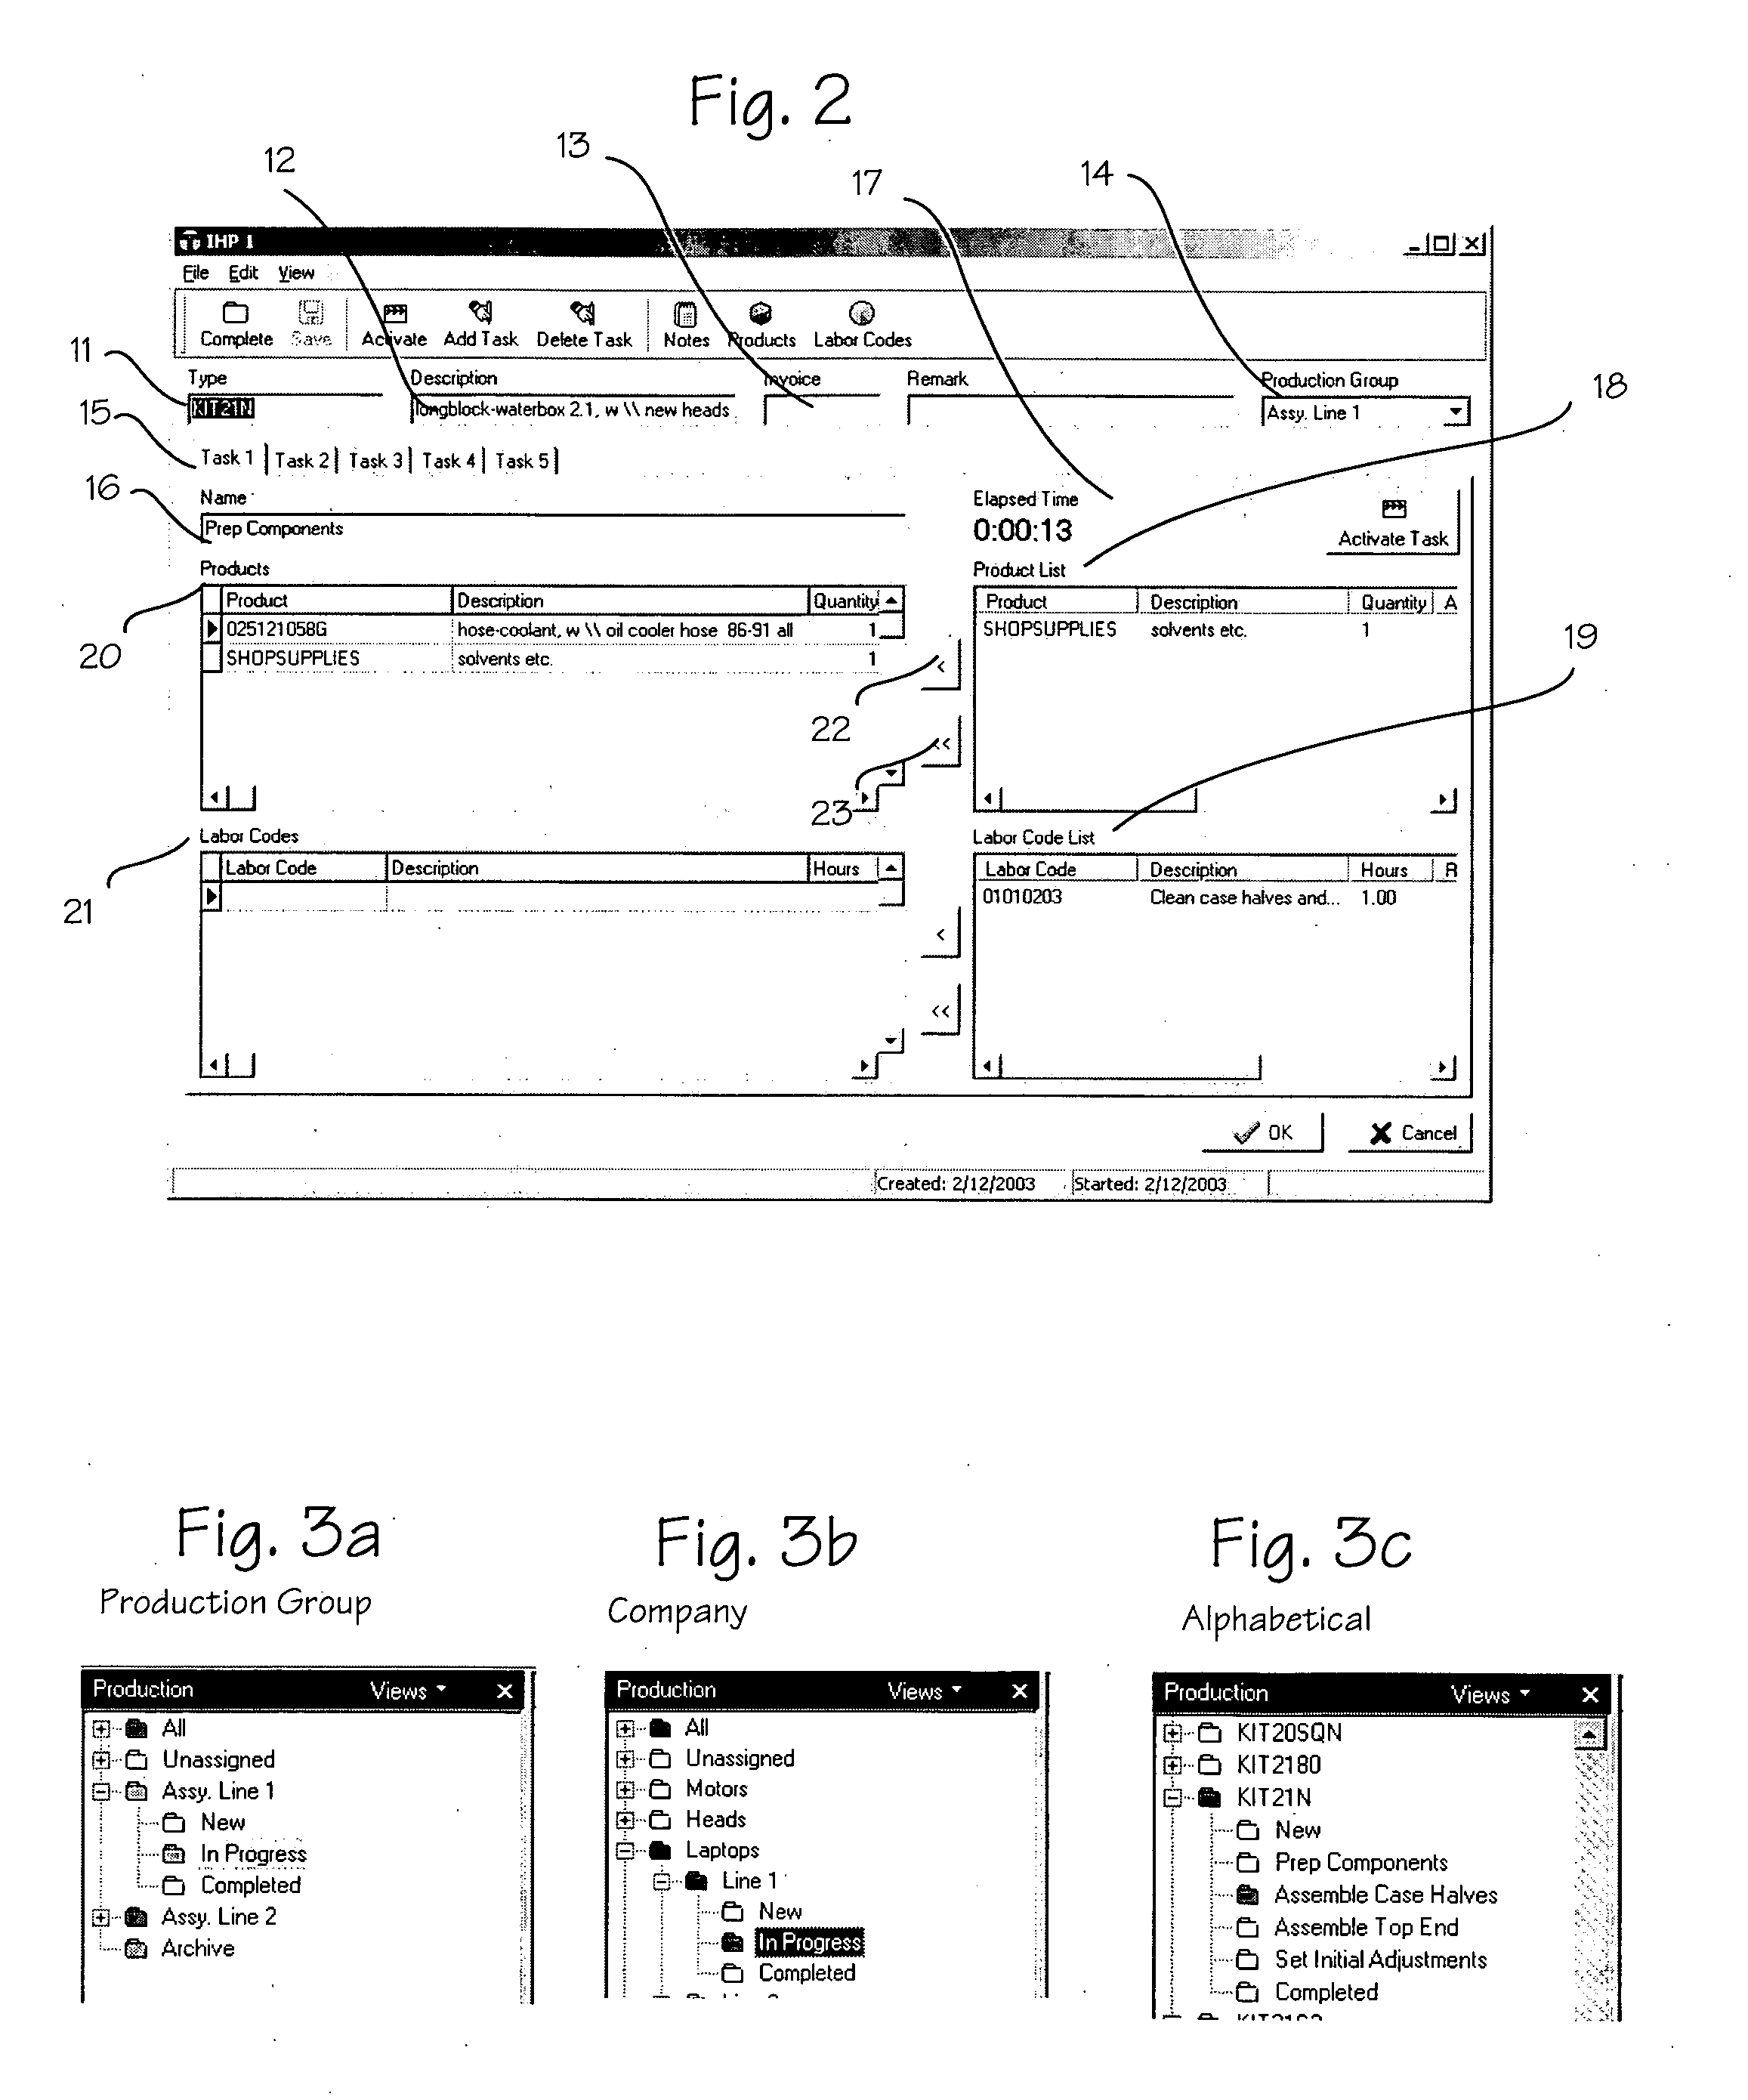 System and method for tracking information in a business environment